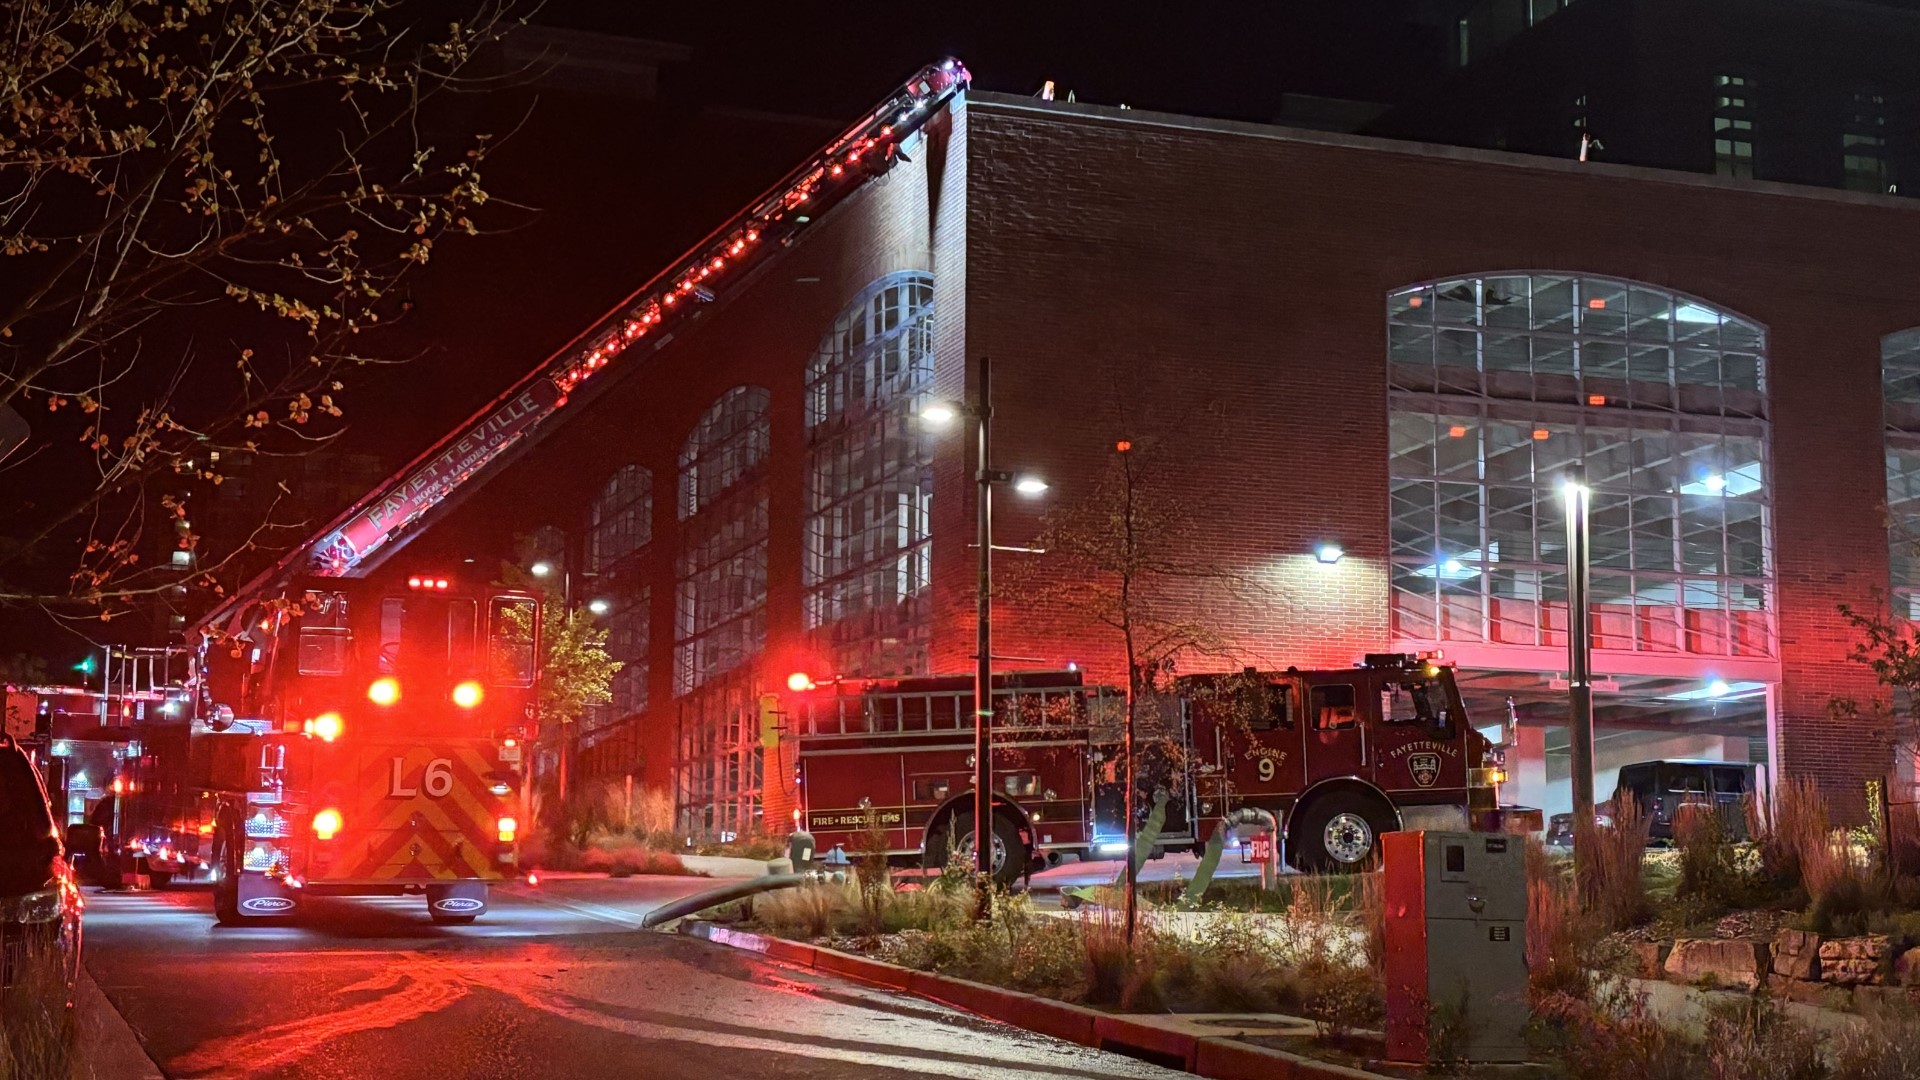 ON SUNDAY, APRIL 14, THE FAYETTEVILLE PUBLIC LIBRARY SUFFERED FROM A ROOFTOP FIRE...